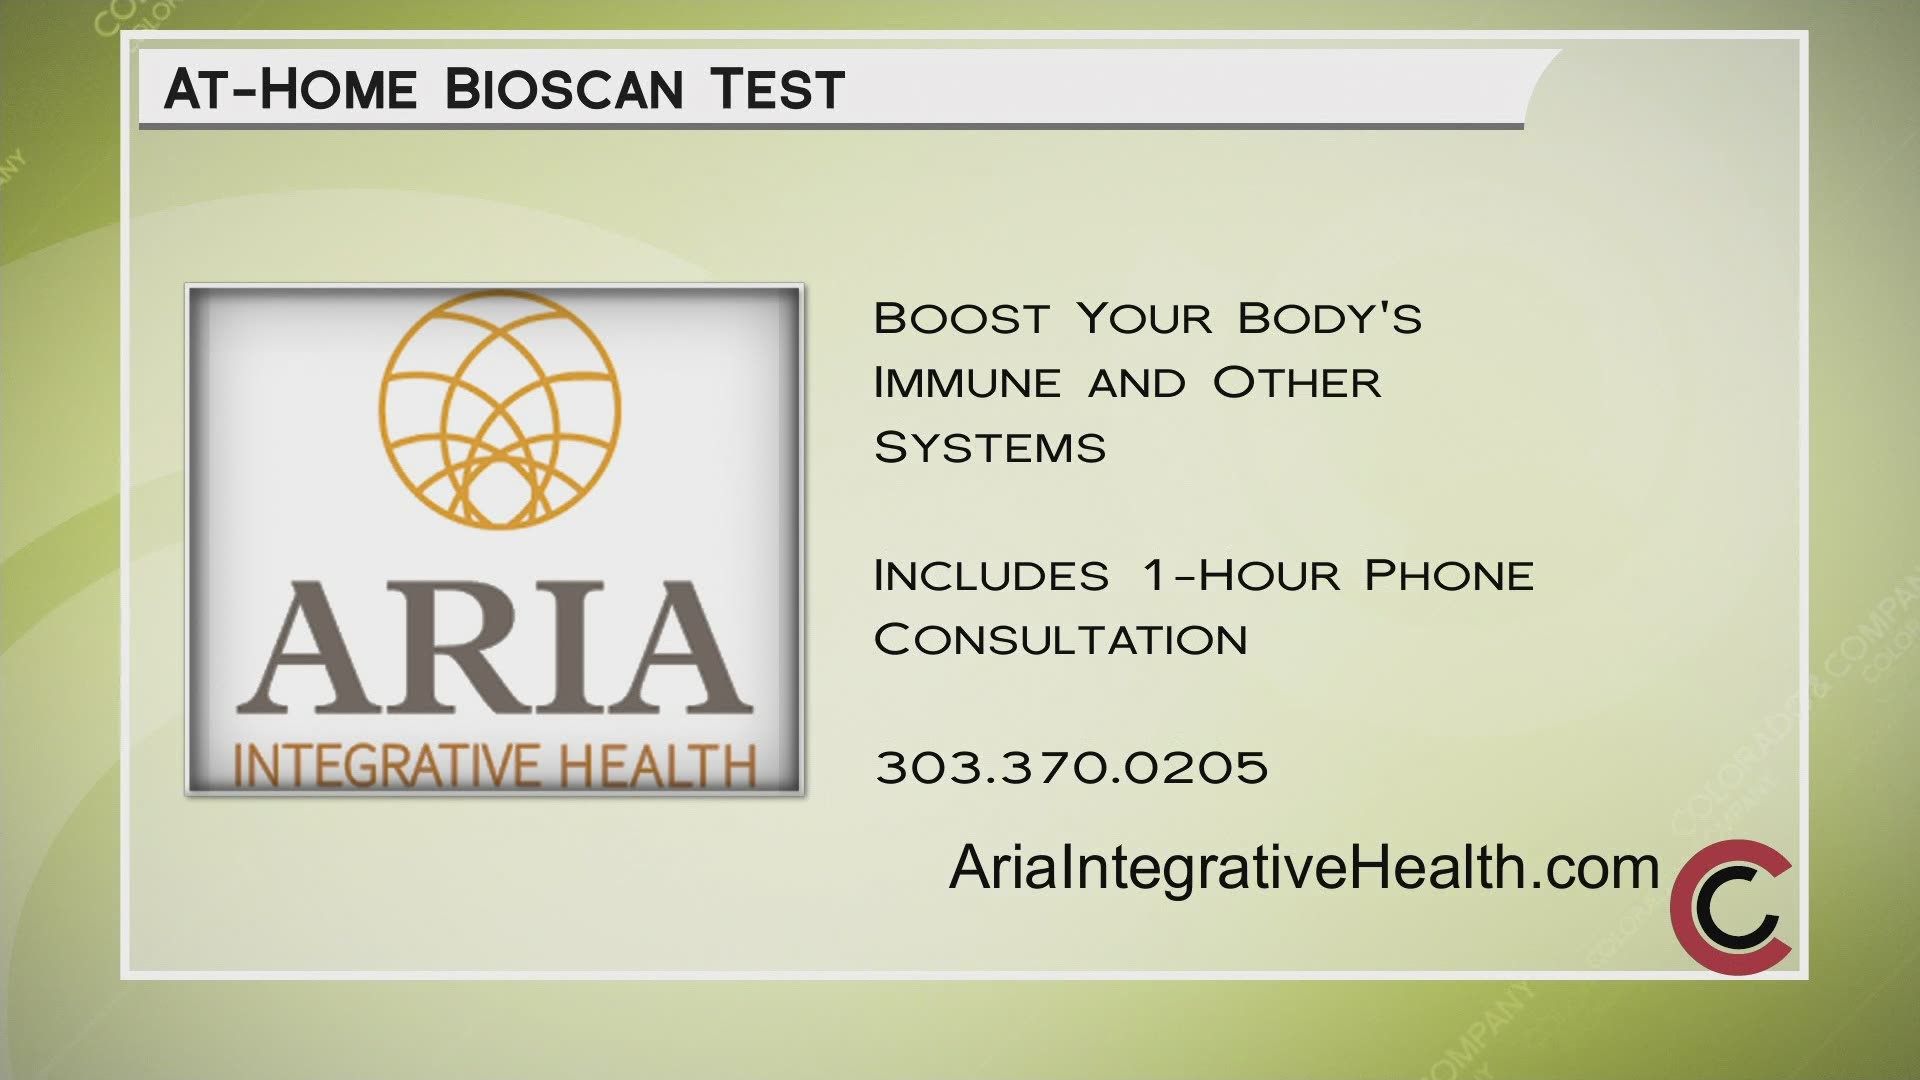 Get your at-home Bioscan kit from Aria Integrative Health by calling 303.370.0205 or online at AriaIntegrativeHealth.com.